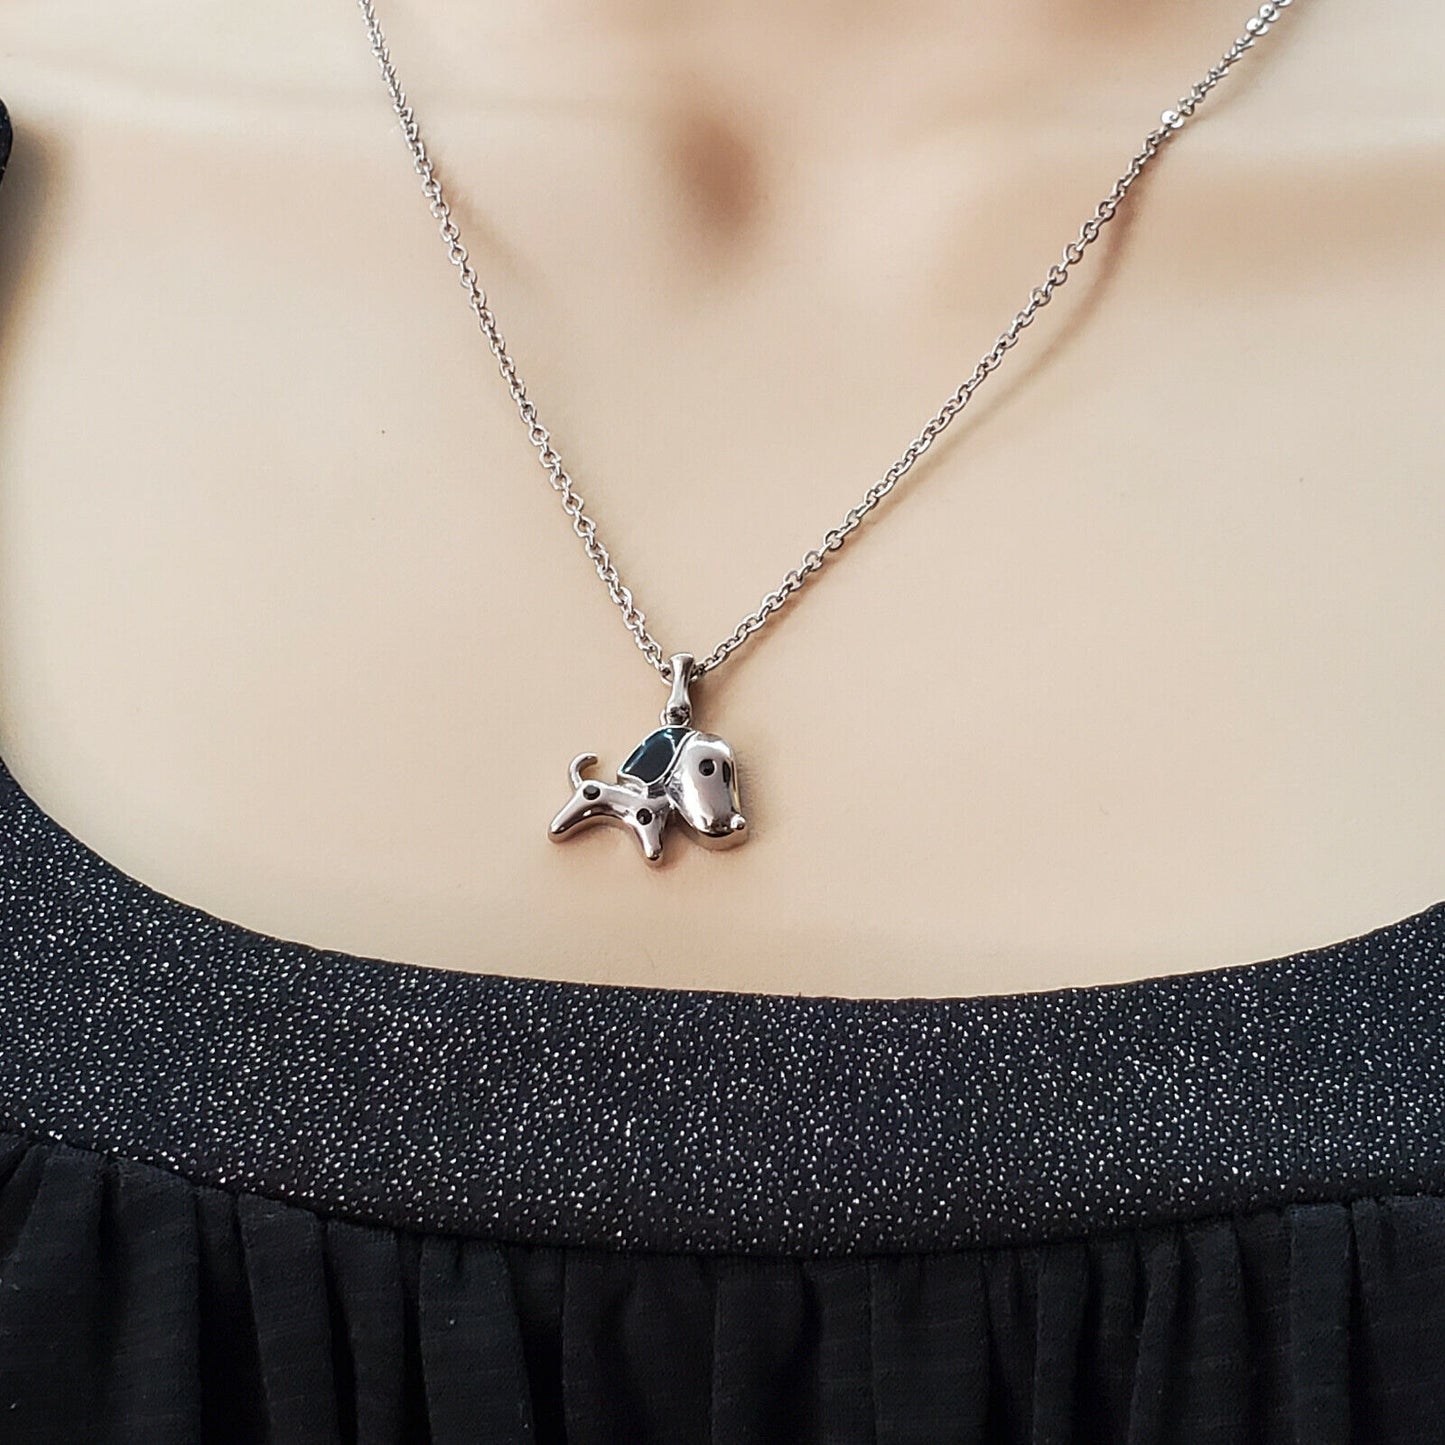 Necklaces - Stainless Steel. Dog Pendant & Chain - Animal Lover